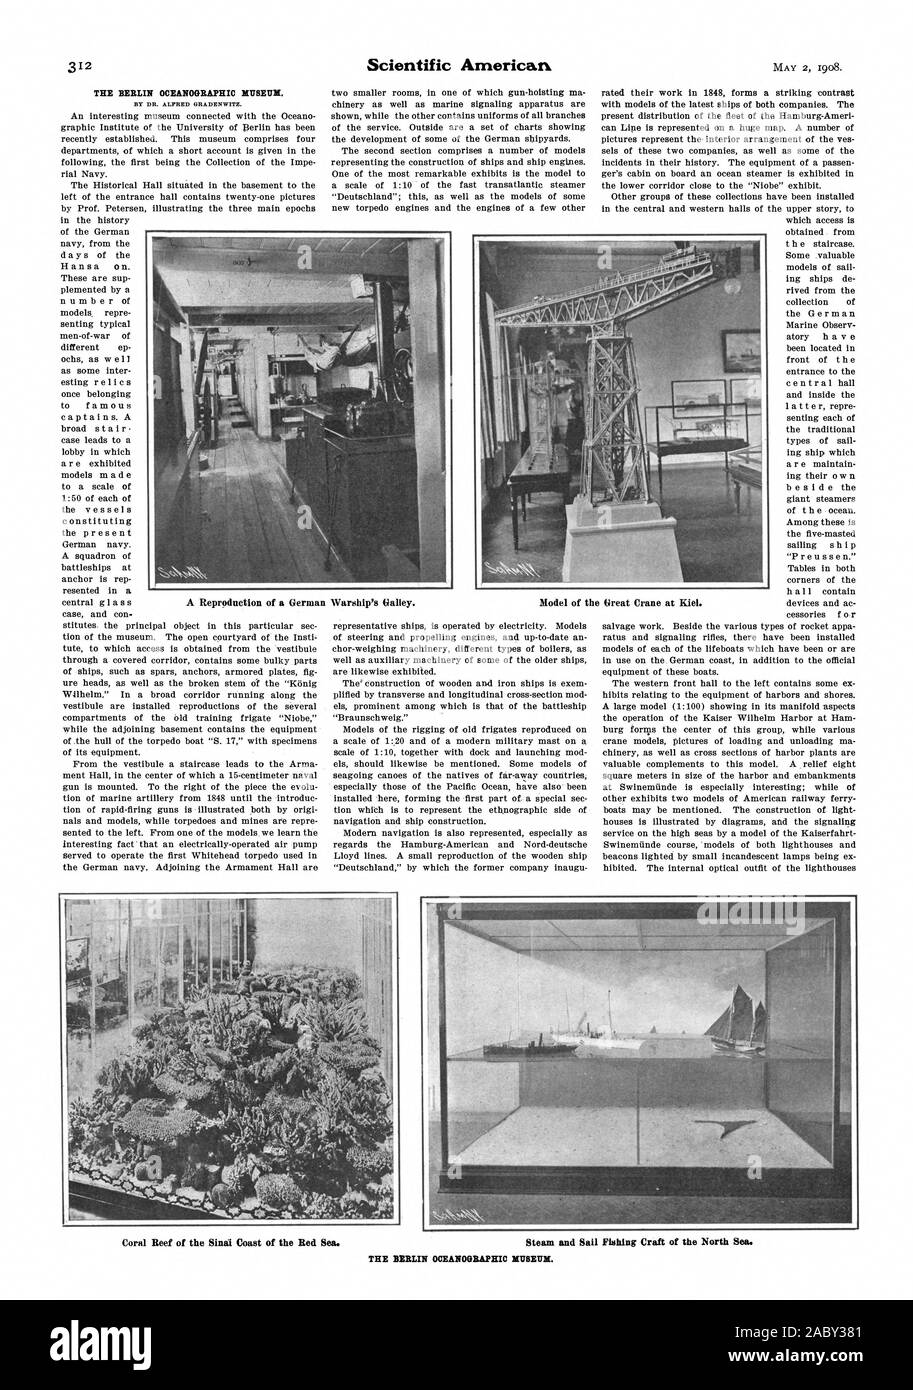 THE BERLIN OCEANOGRAPHIC MUSEUM. A Reproduction of a German Warship's Galley. Model of the Great Crane at Kiel. THE BERLIN OCEANOGRAPHIC MUSEUM., scientific american, 1908-05-02 Stock Photo